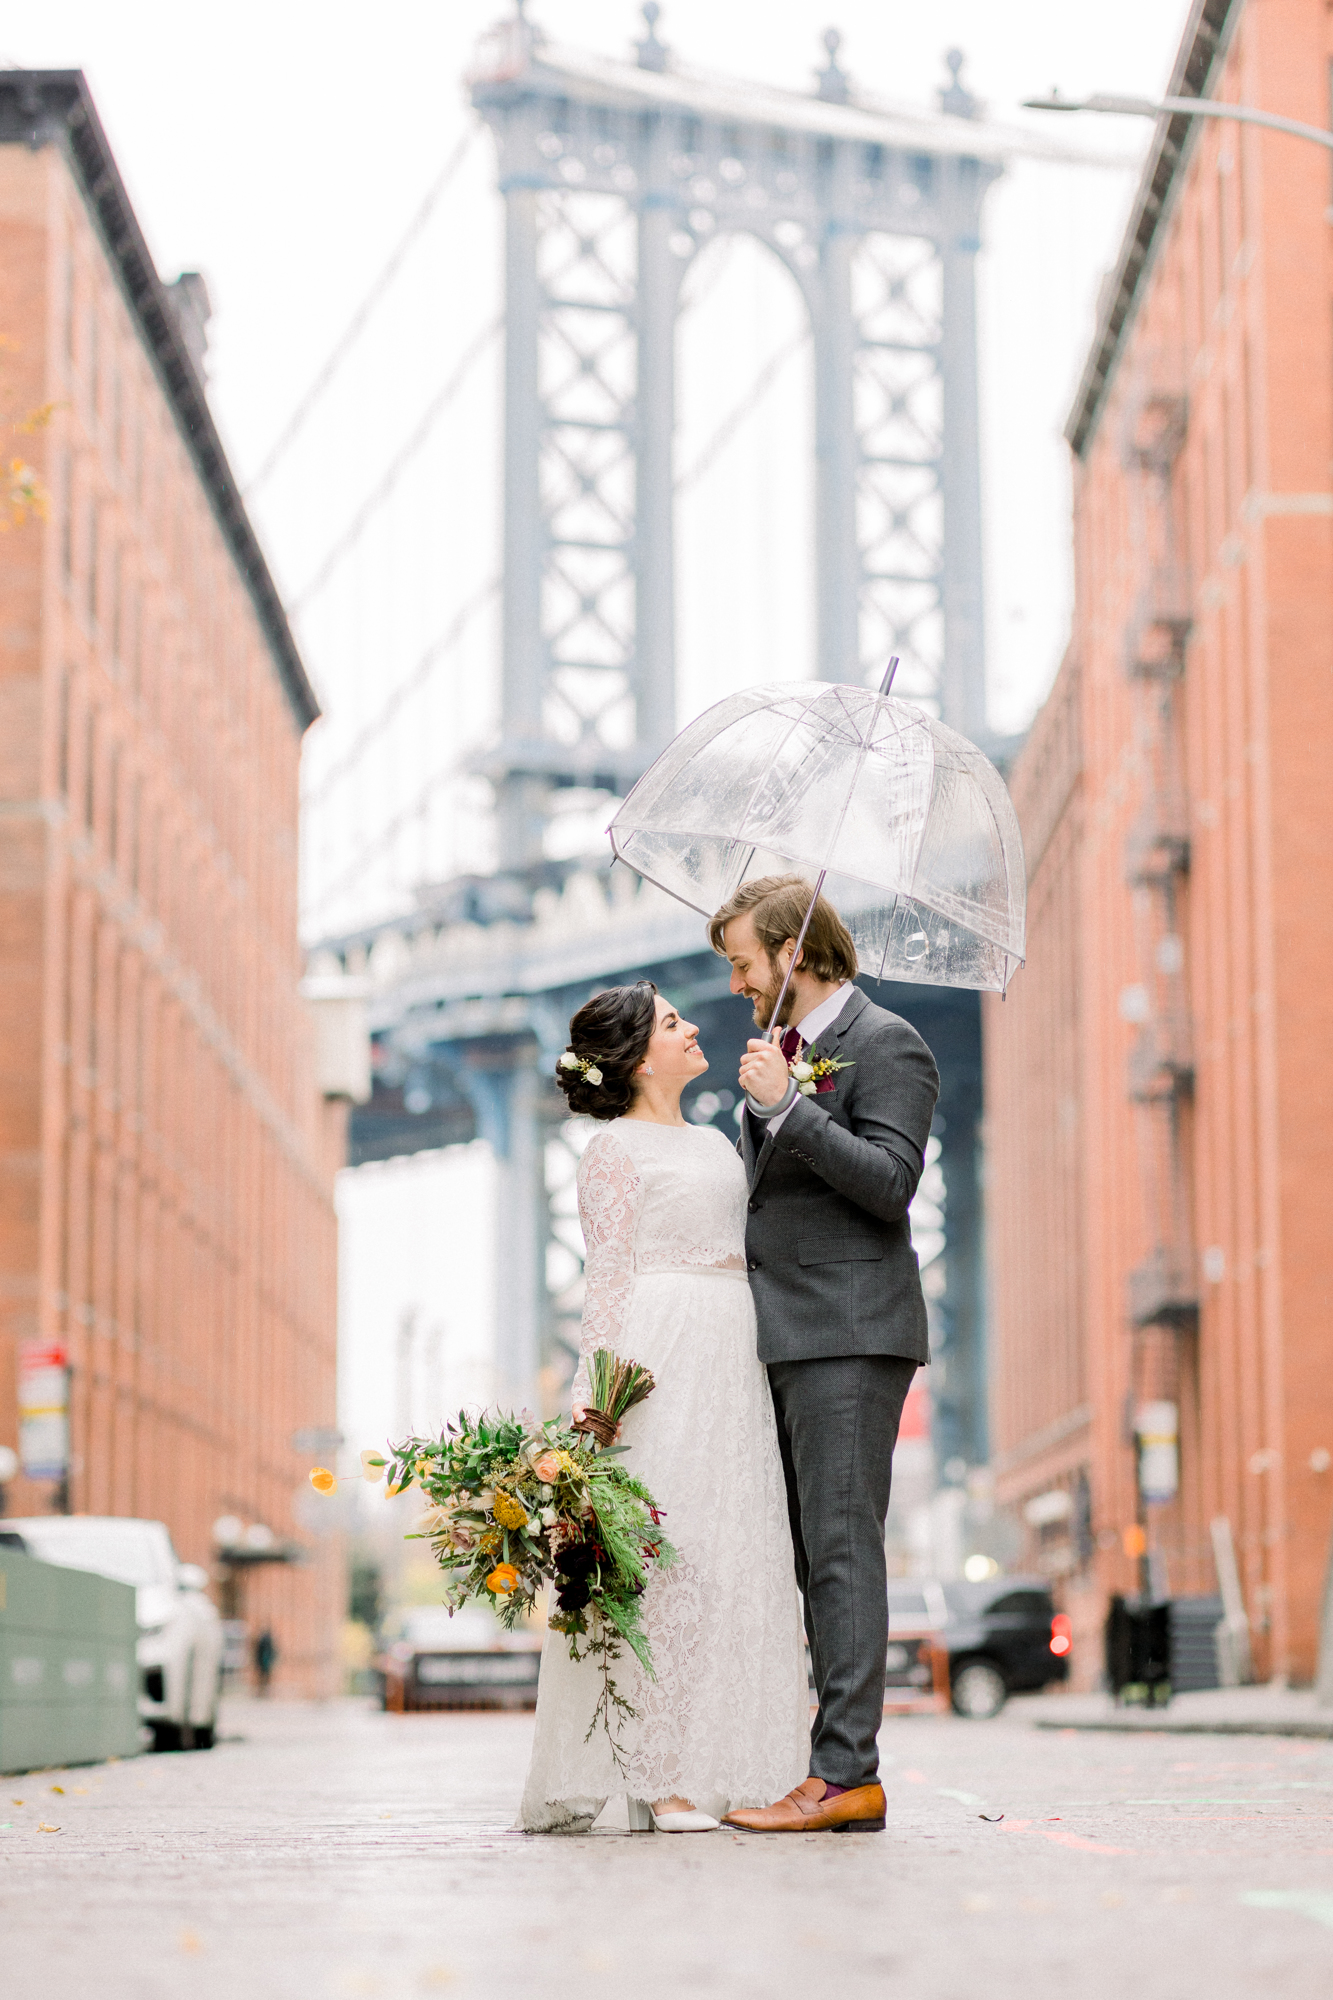 When to hire a wedding photographer